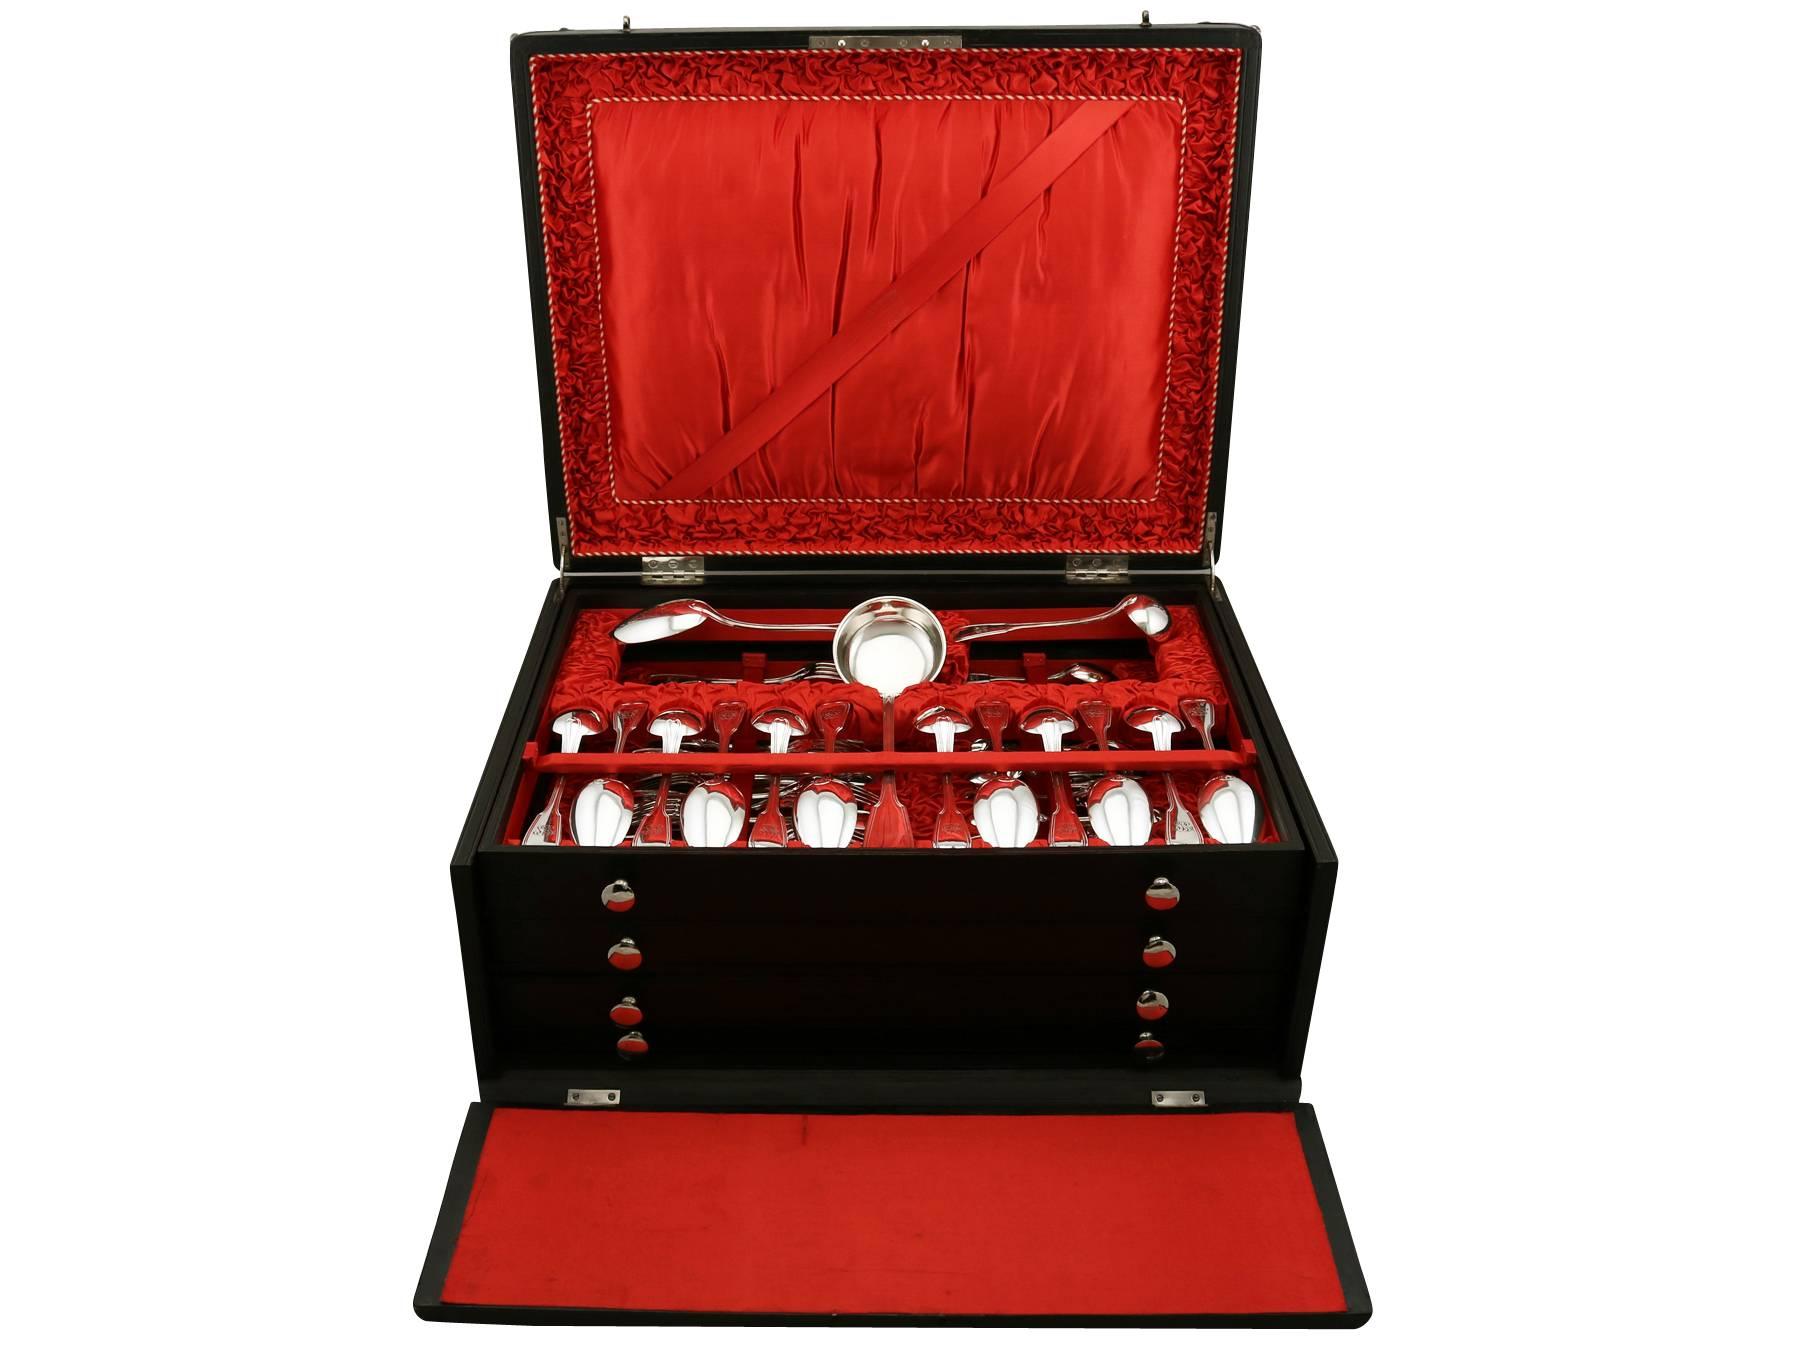 An exceptional, fine and impressive antique German silver boxed canteen of cutlery for 12 persons, boxed; an addition to our flatware collection

The pieces of this exceptional, antique German silver boxed canteen of cutlery for 12 persons have